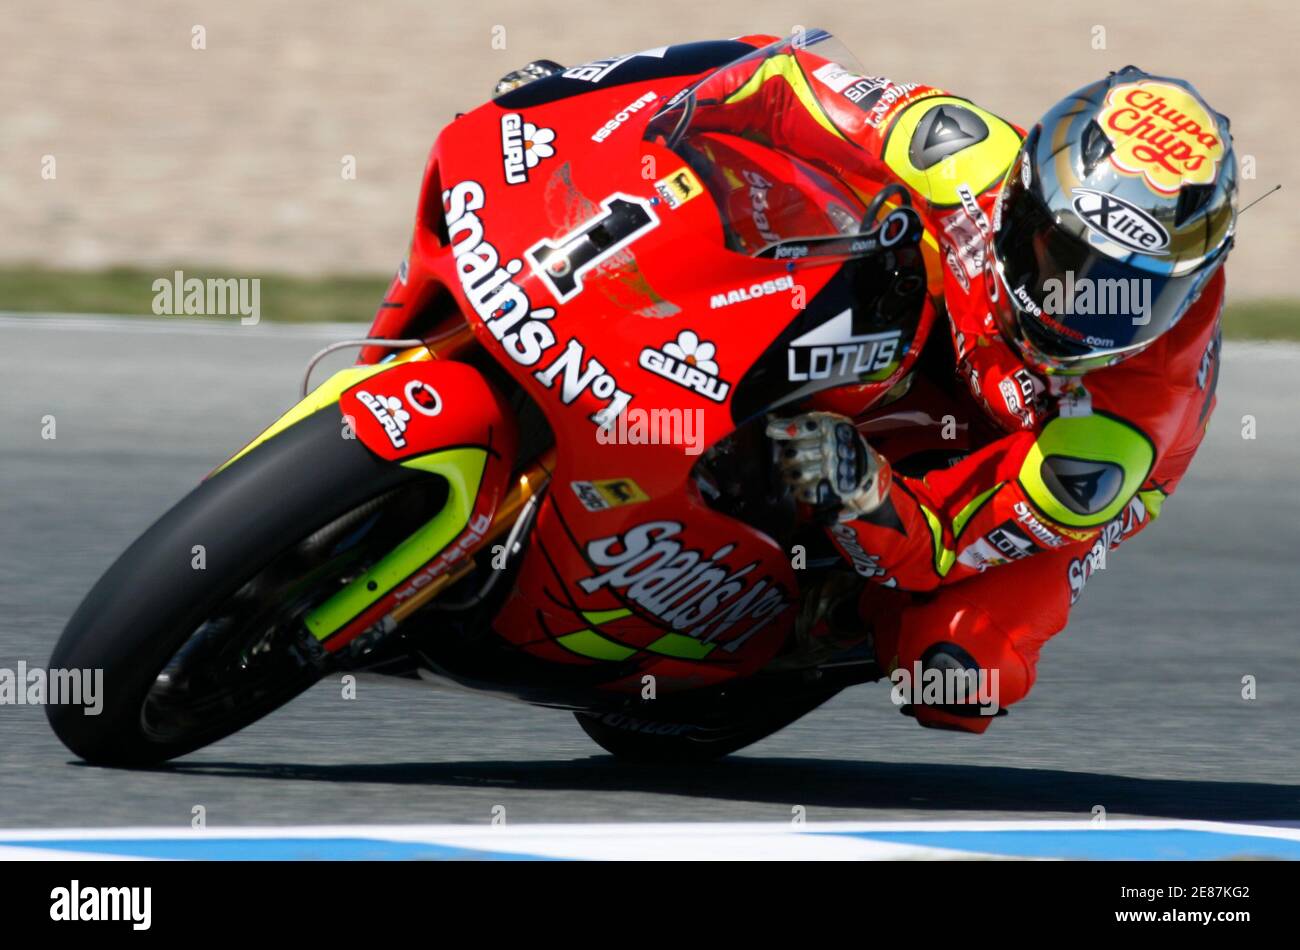 Aprilia team 250cc rider Jorge Lorenzo of Spain takes a curve during the  first free practice session of the Spanish Grand Prix in Jerez March 23,  2007. REUTERS/Anton Meres (SPAIN Stock Photo -